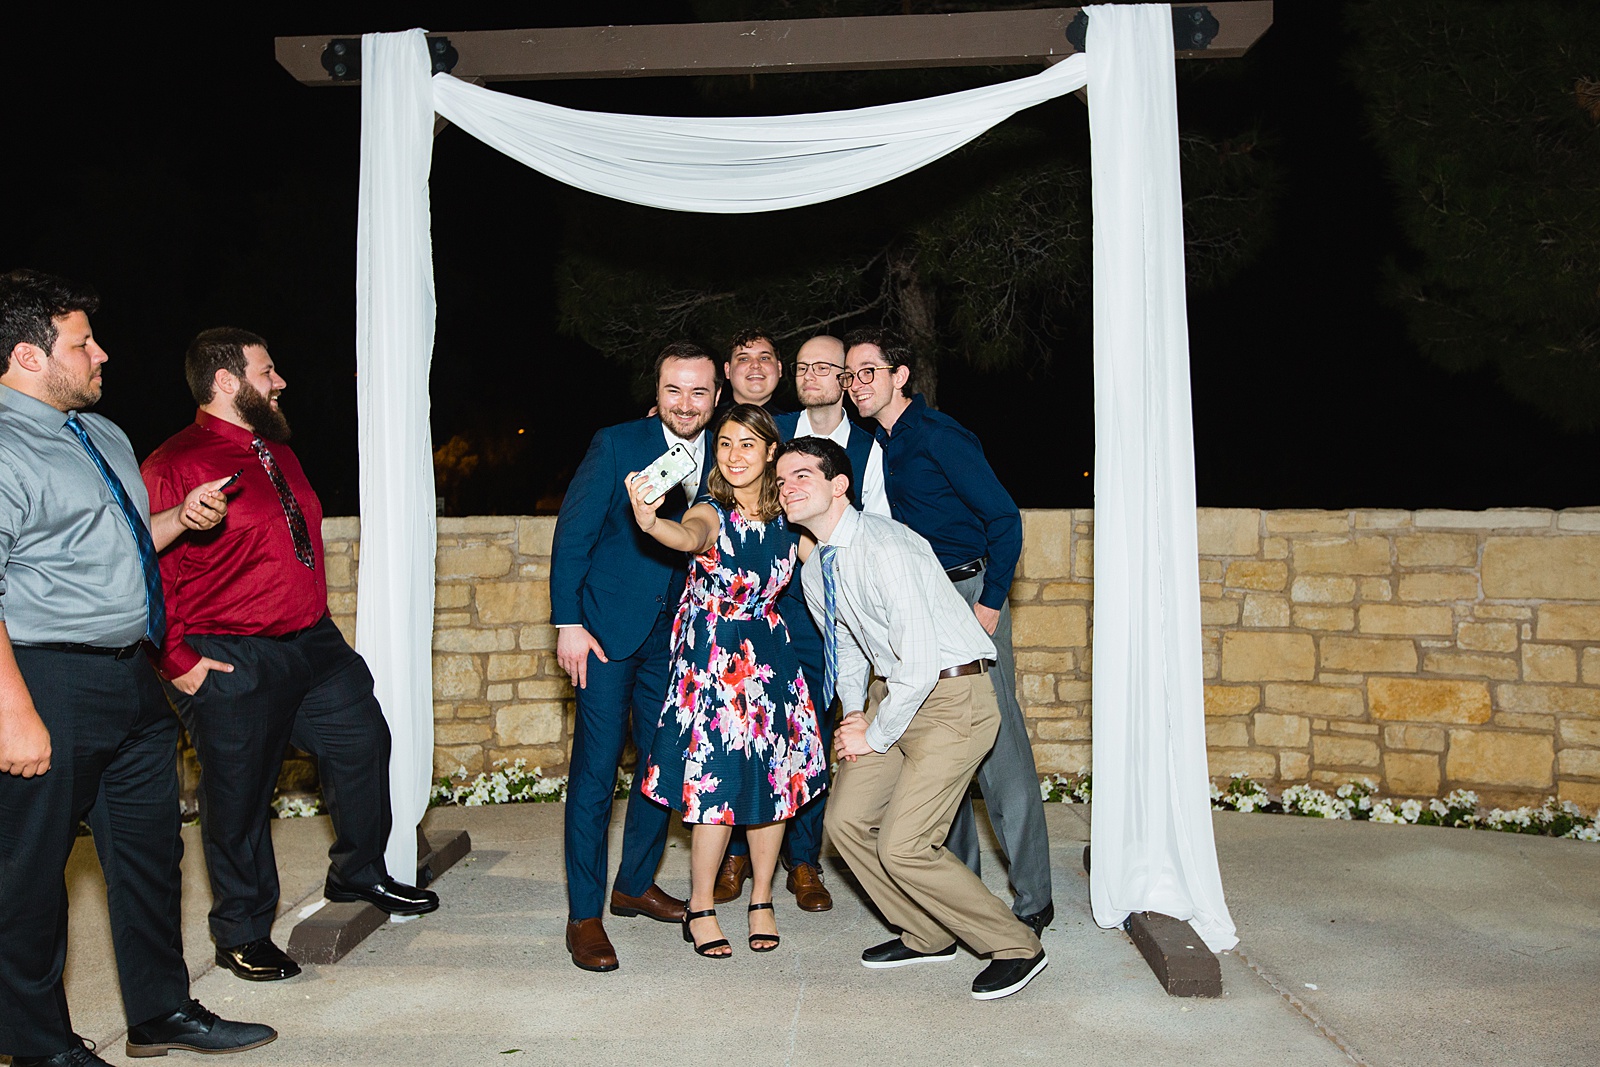 Candid photo of the groom taking a selfie with guest by Arizona wedding photographer PMA Photography.